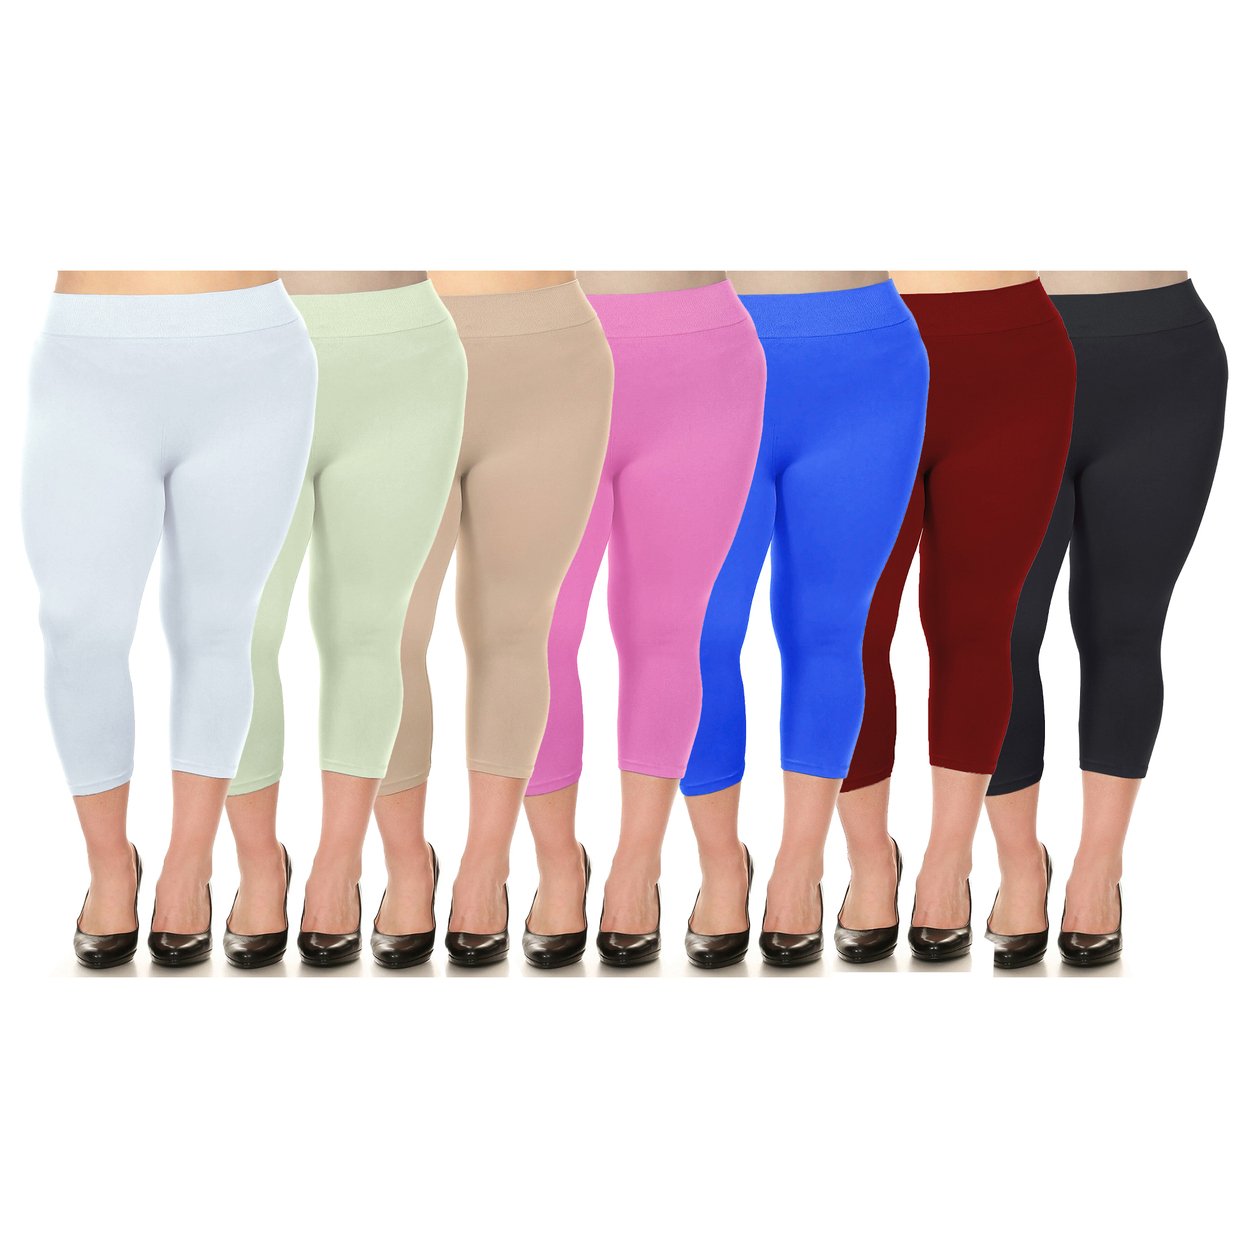 Women's Ultra-Soft High Waisted Smooth Stretch Active Yoga Capri Leggings Plus Size Available - Red, 3x